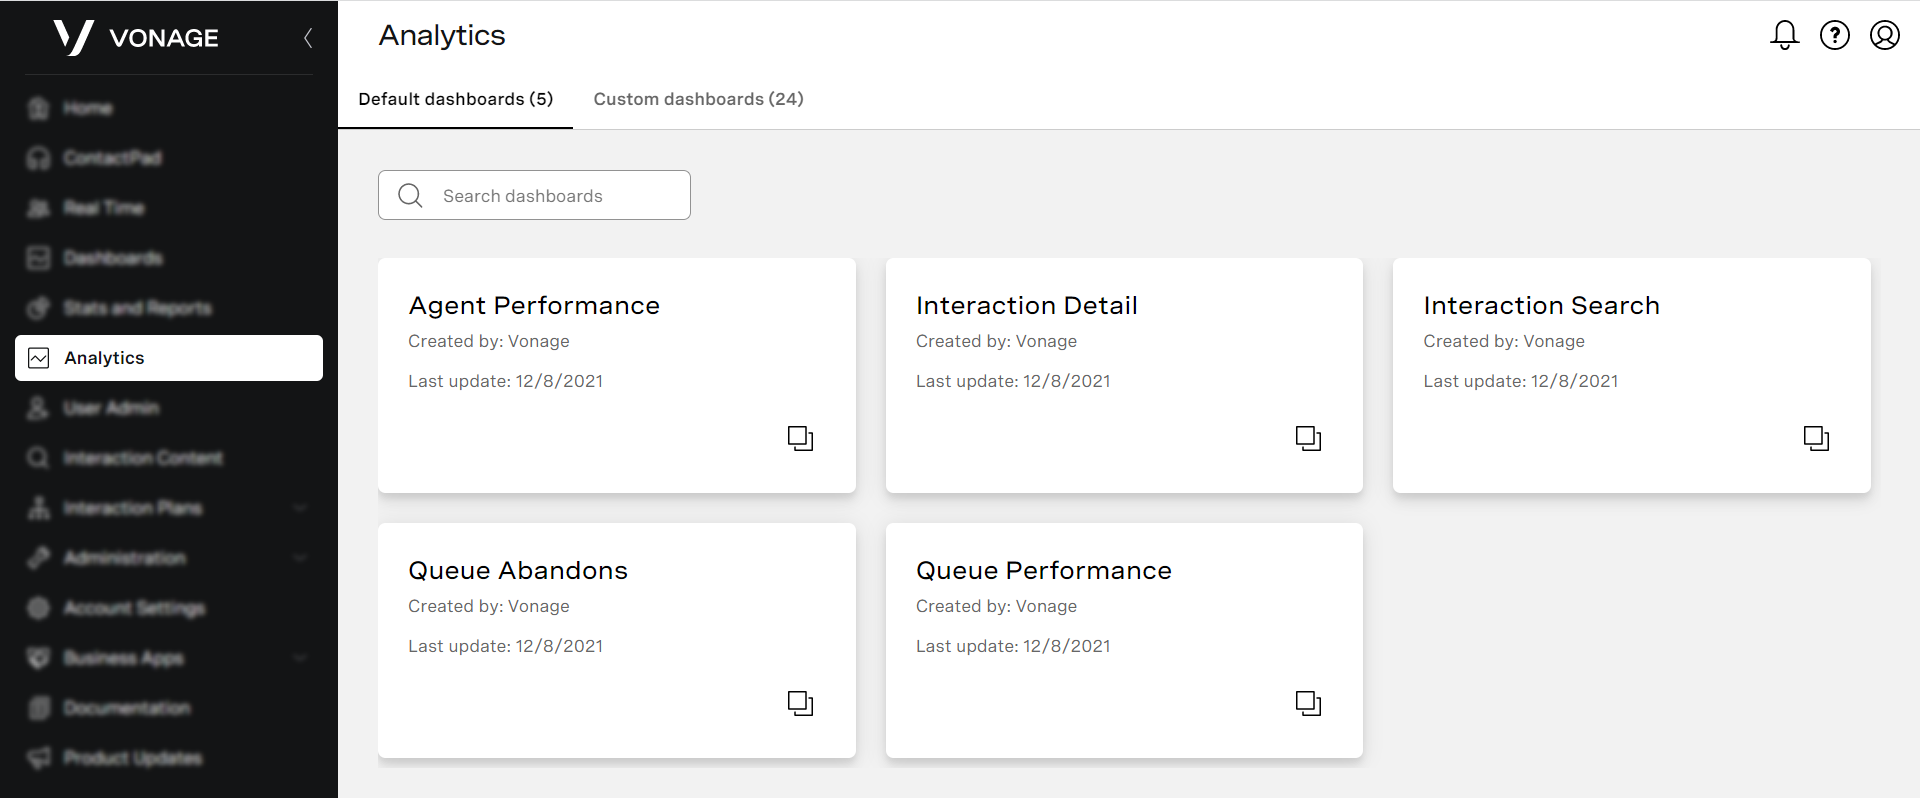 Accessing Analytics Dashboards